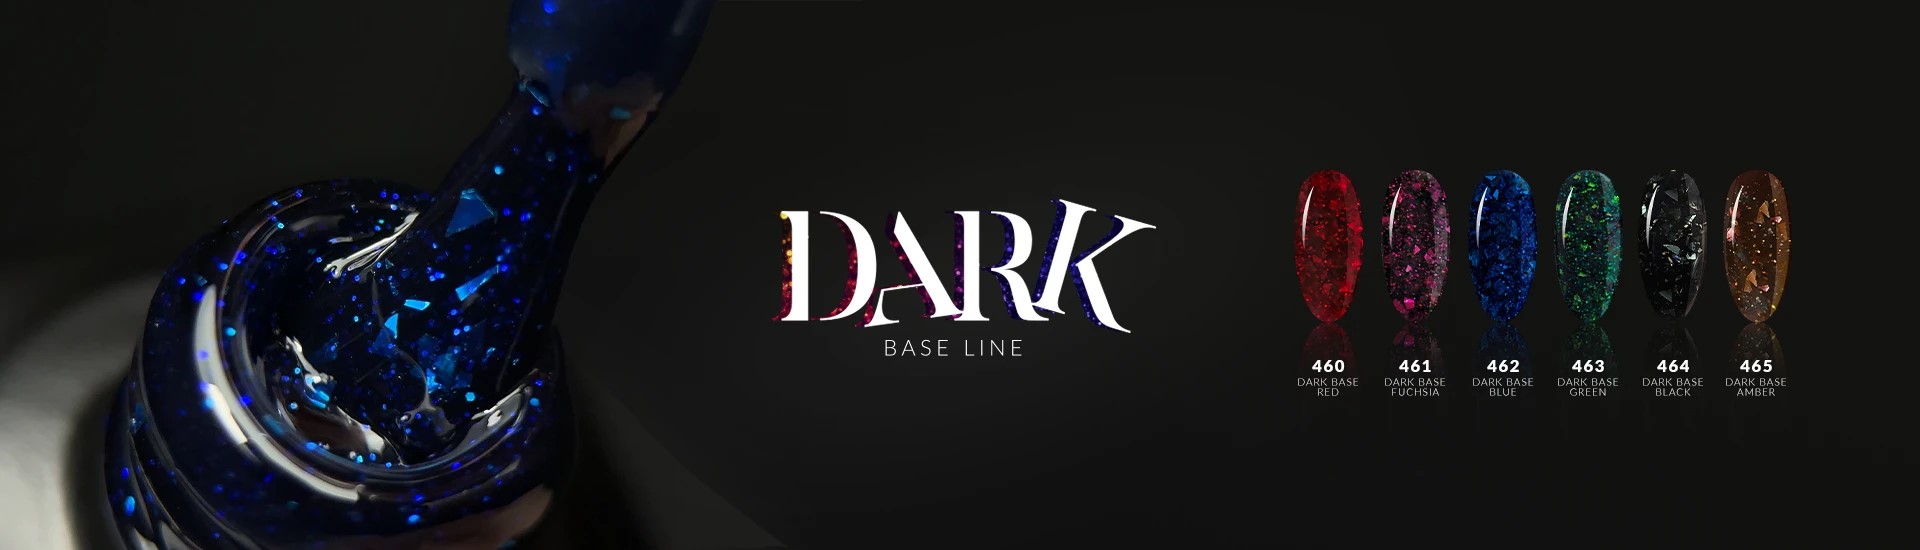 Dark Base Cover Line - Your Trends